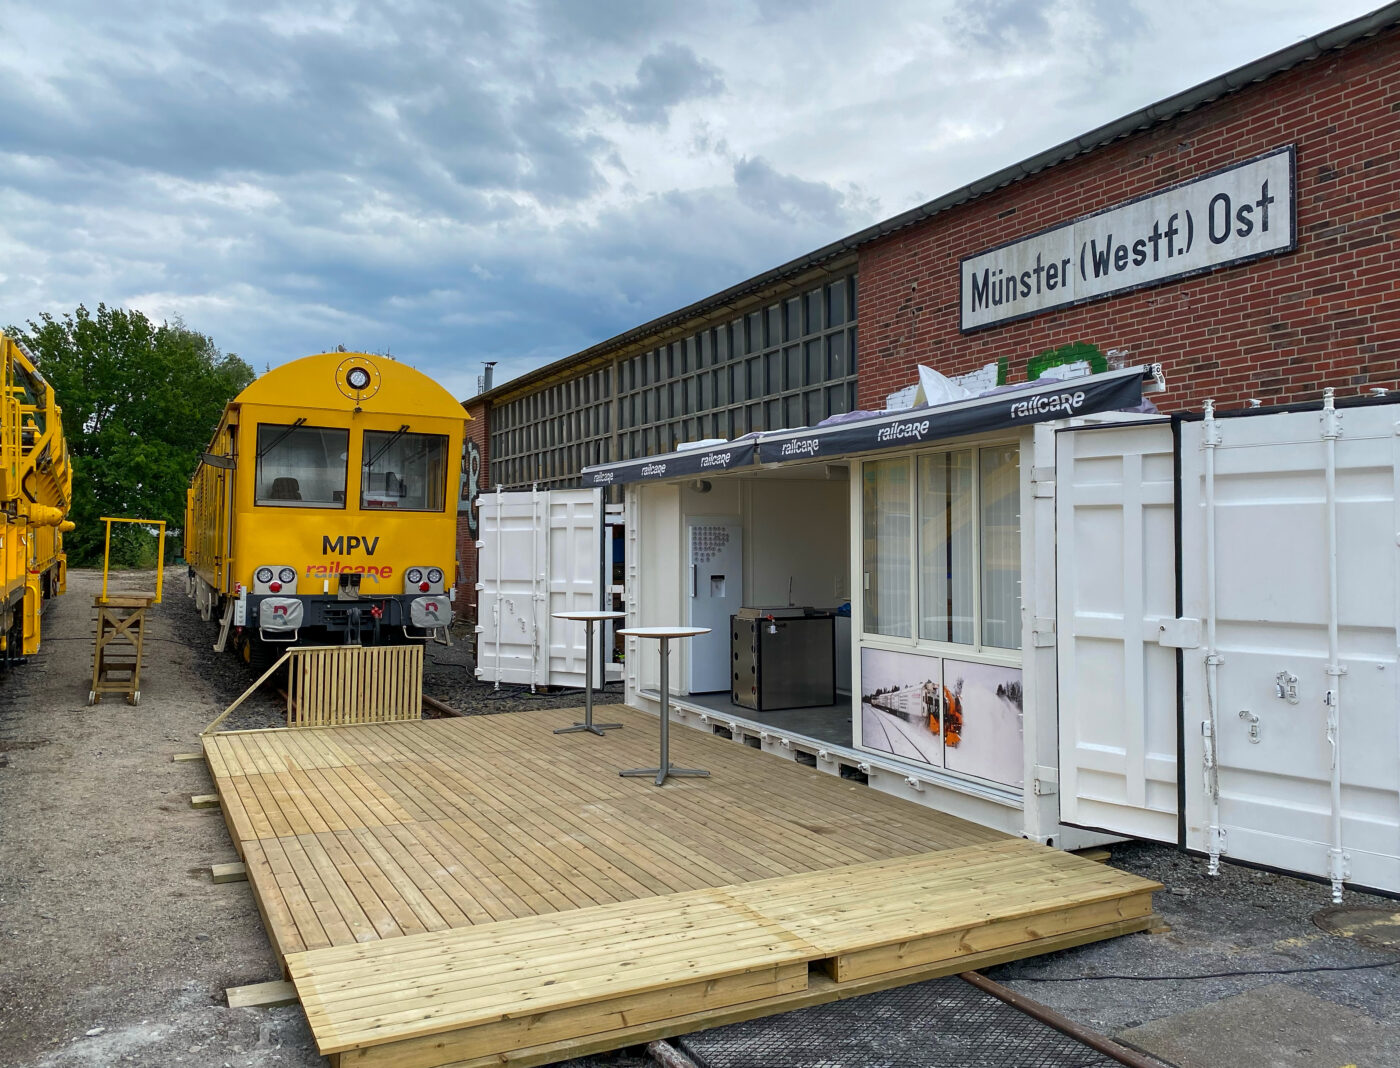 Railcare’s battery-powered maintenance machine arrives in Münster